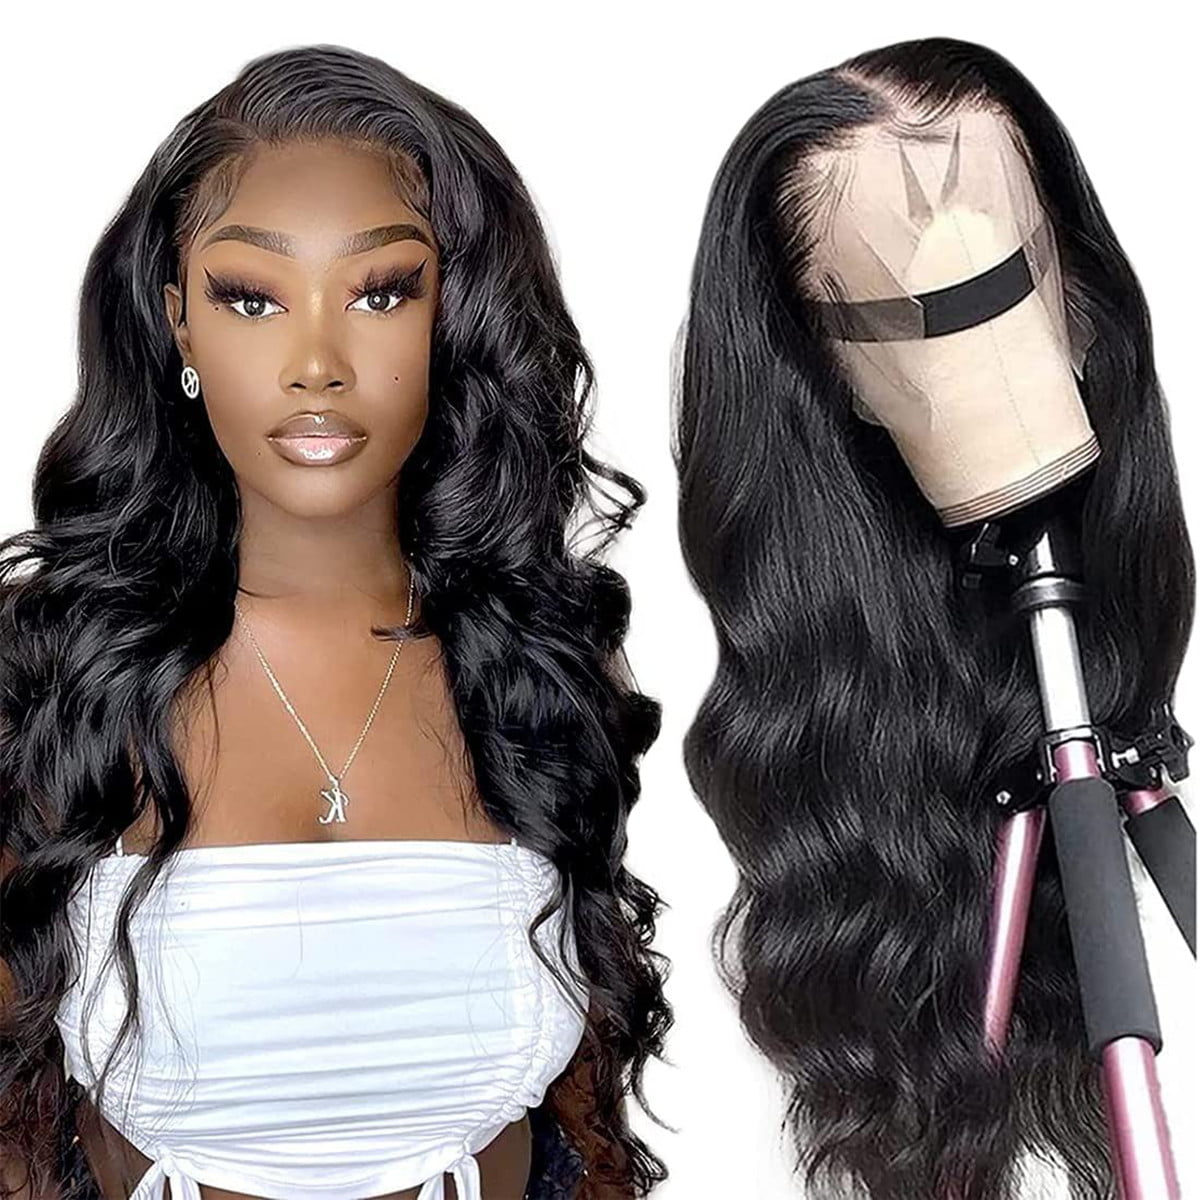 VONAR Body Wave Frontal Wig 13x4 Lace Front Wigs for Women Human Hair ...